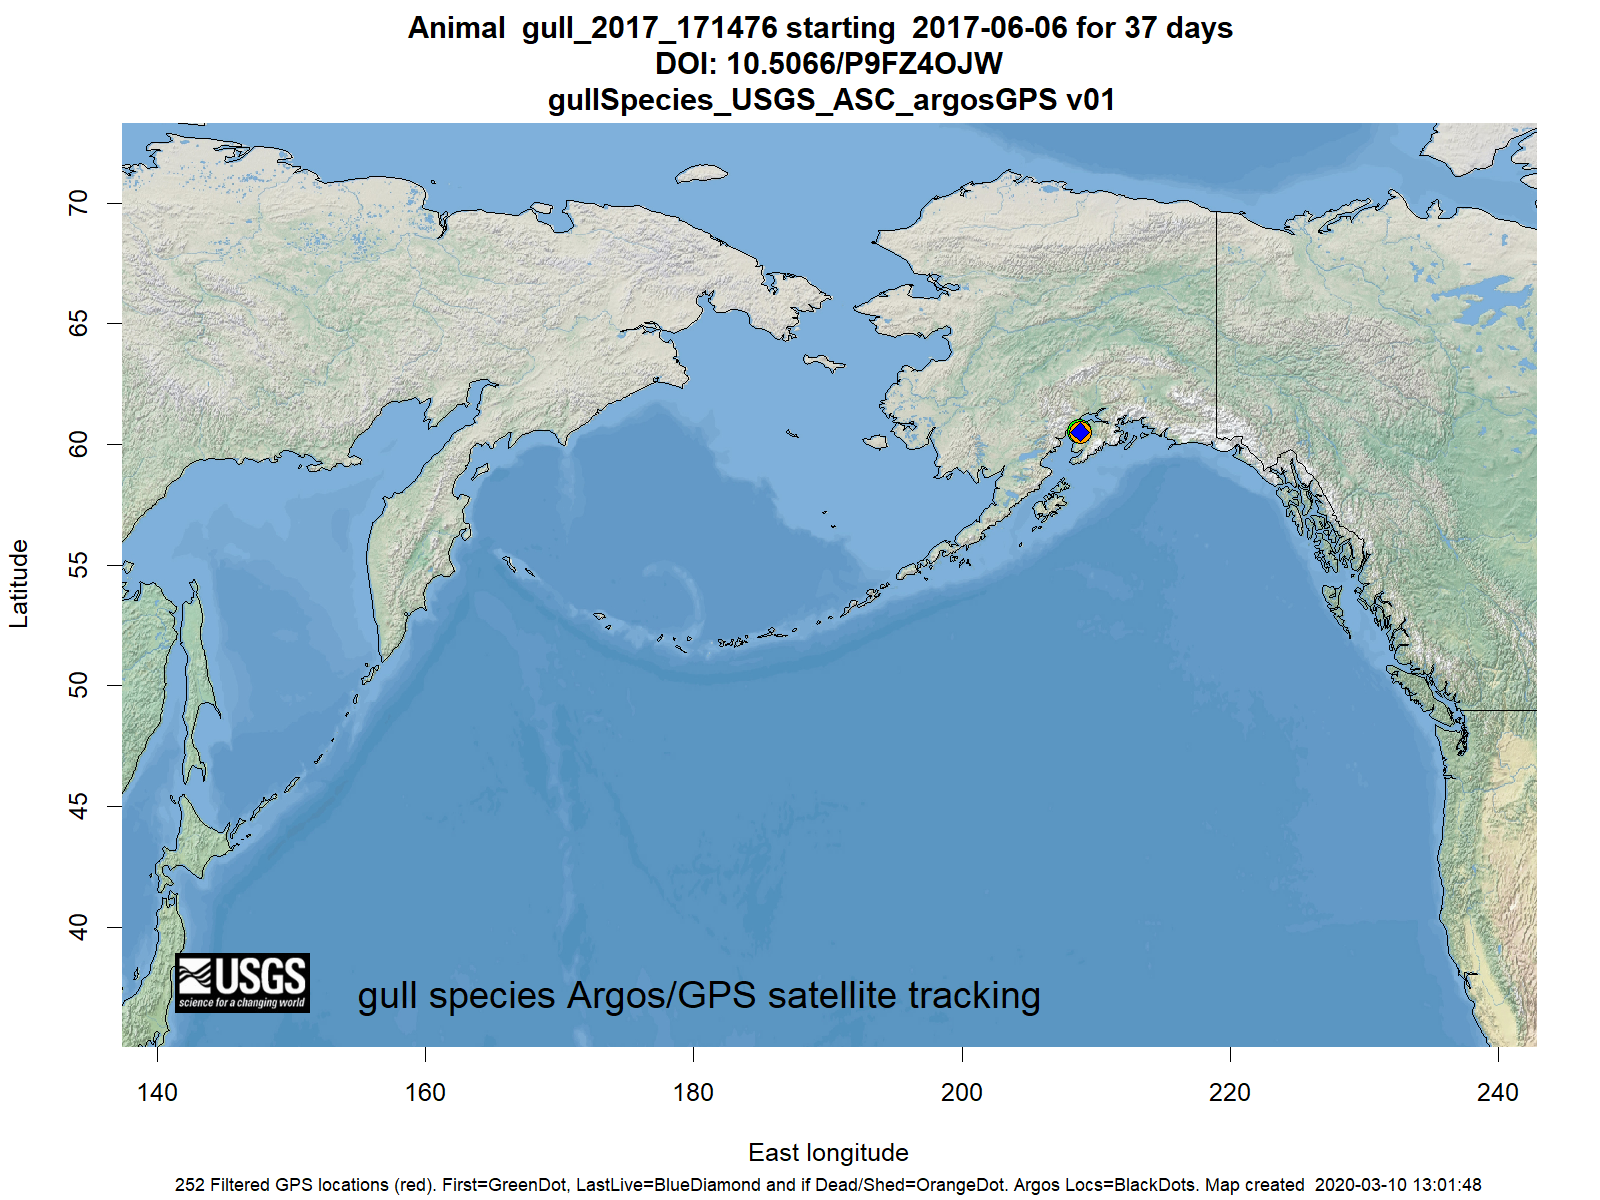 Tracking map for species gull_2017_171476